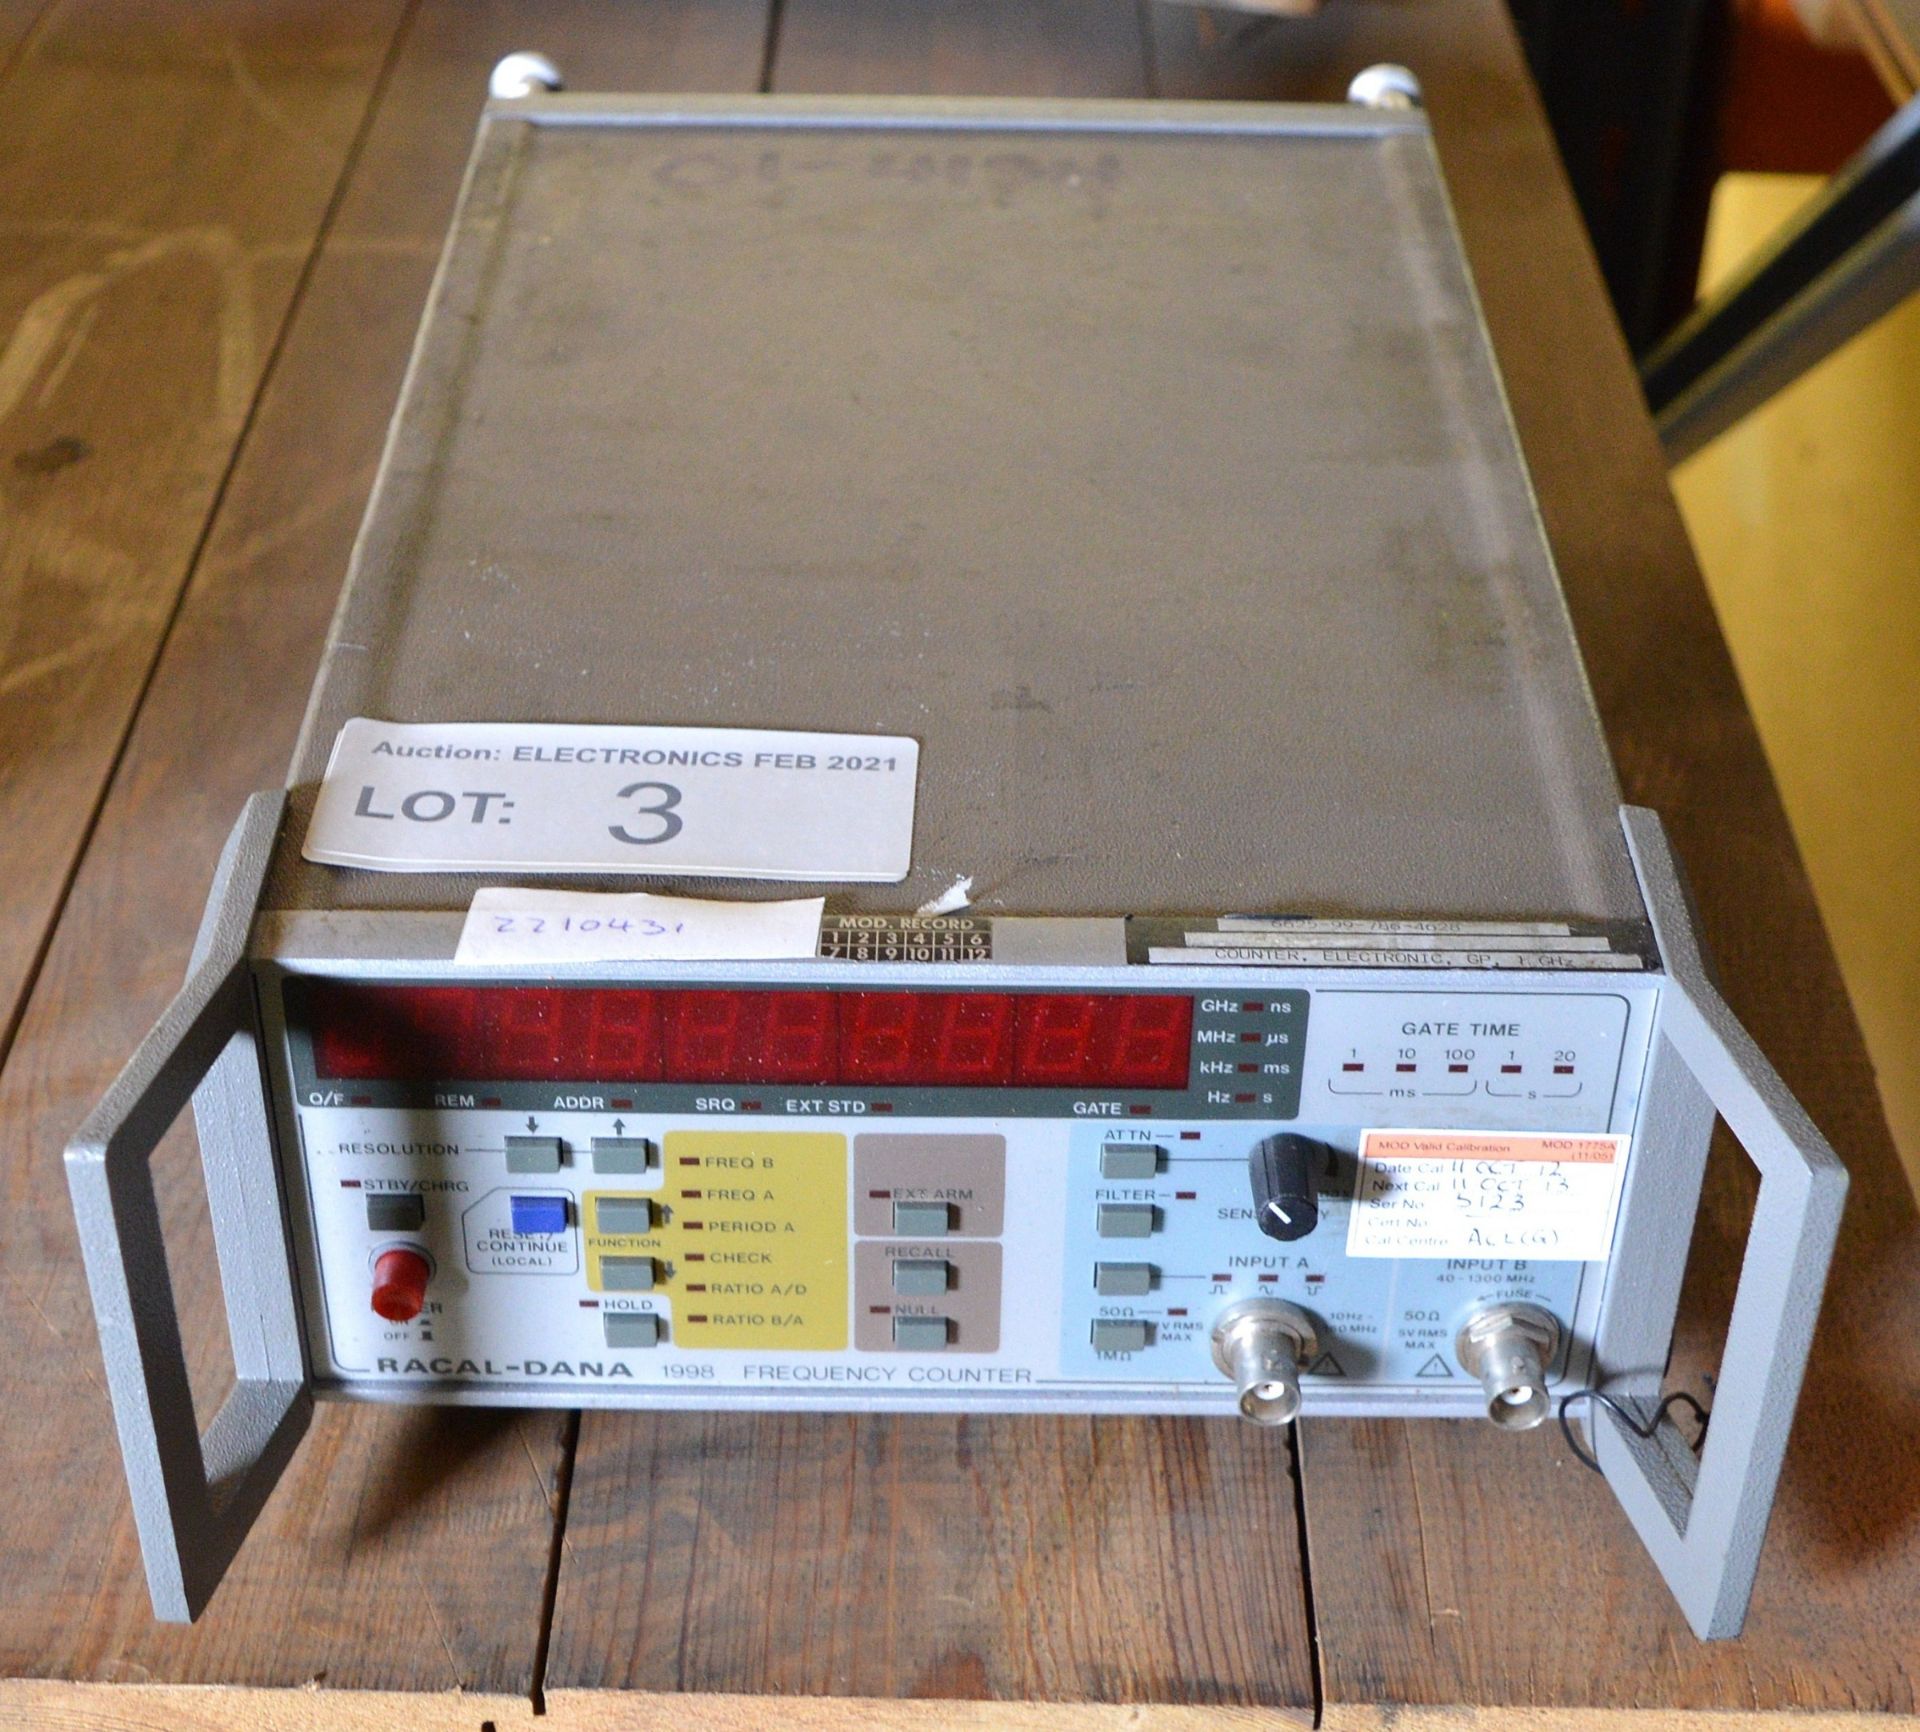 Racal-Dana 1998 Frequency Counter (No power cable) - Image 2 of 3